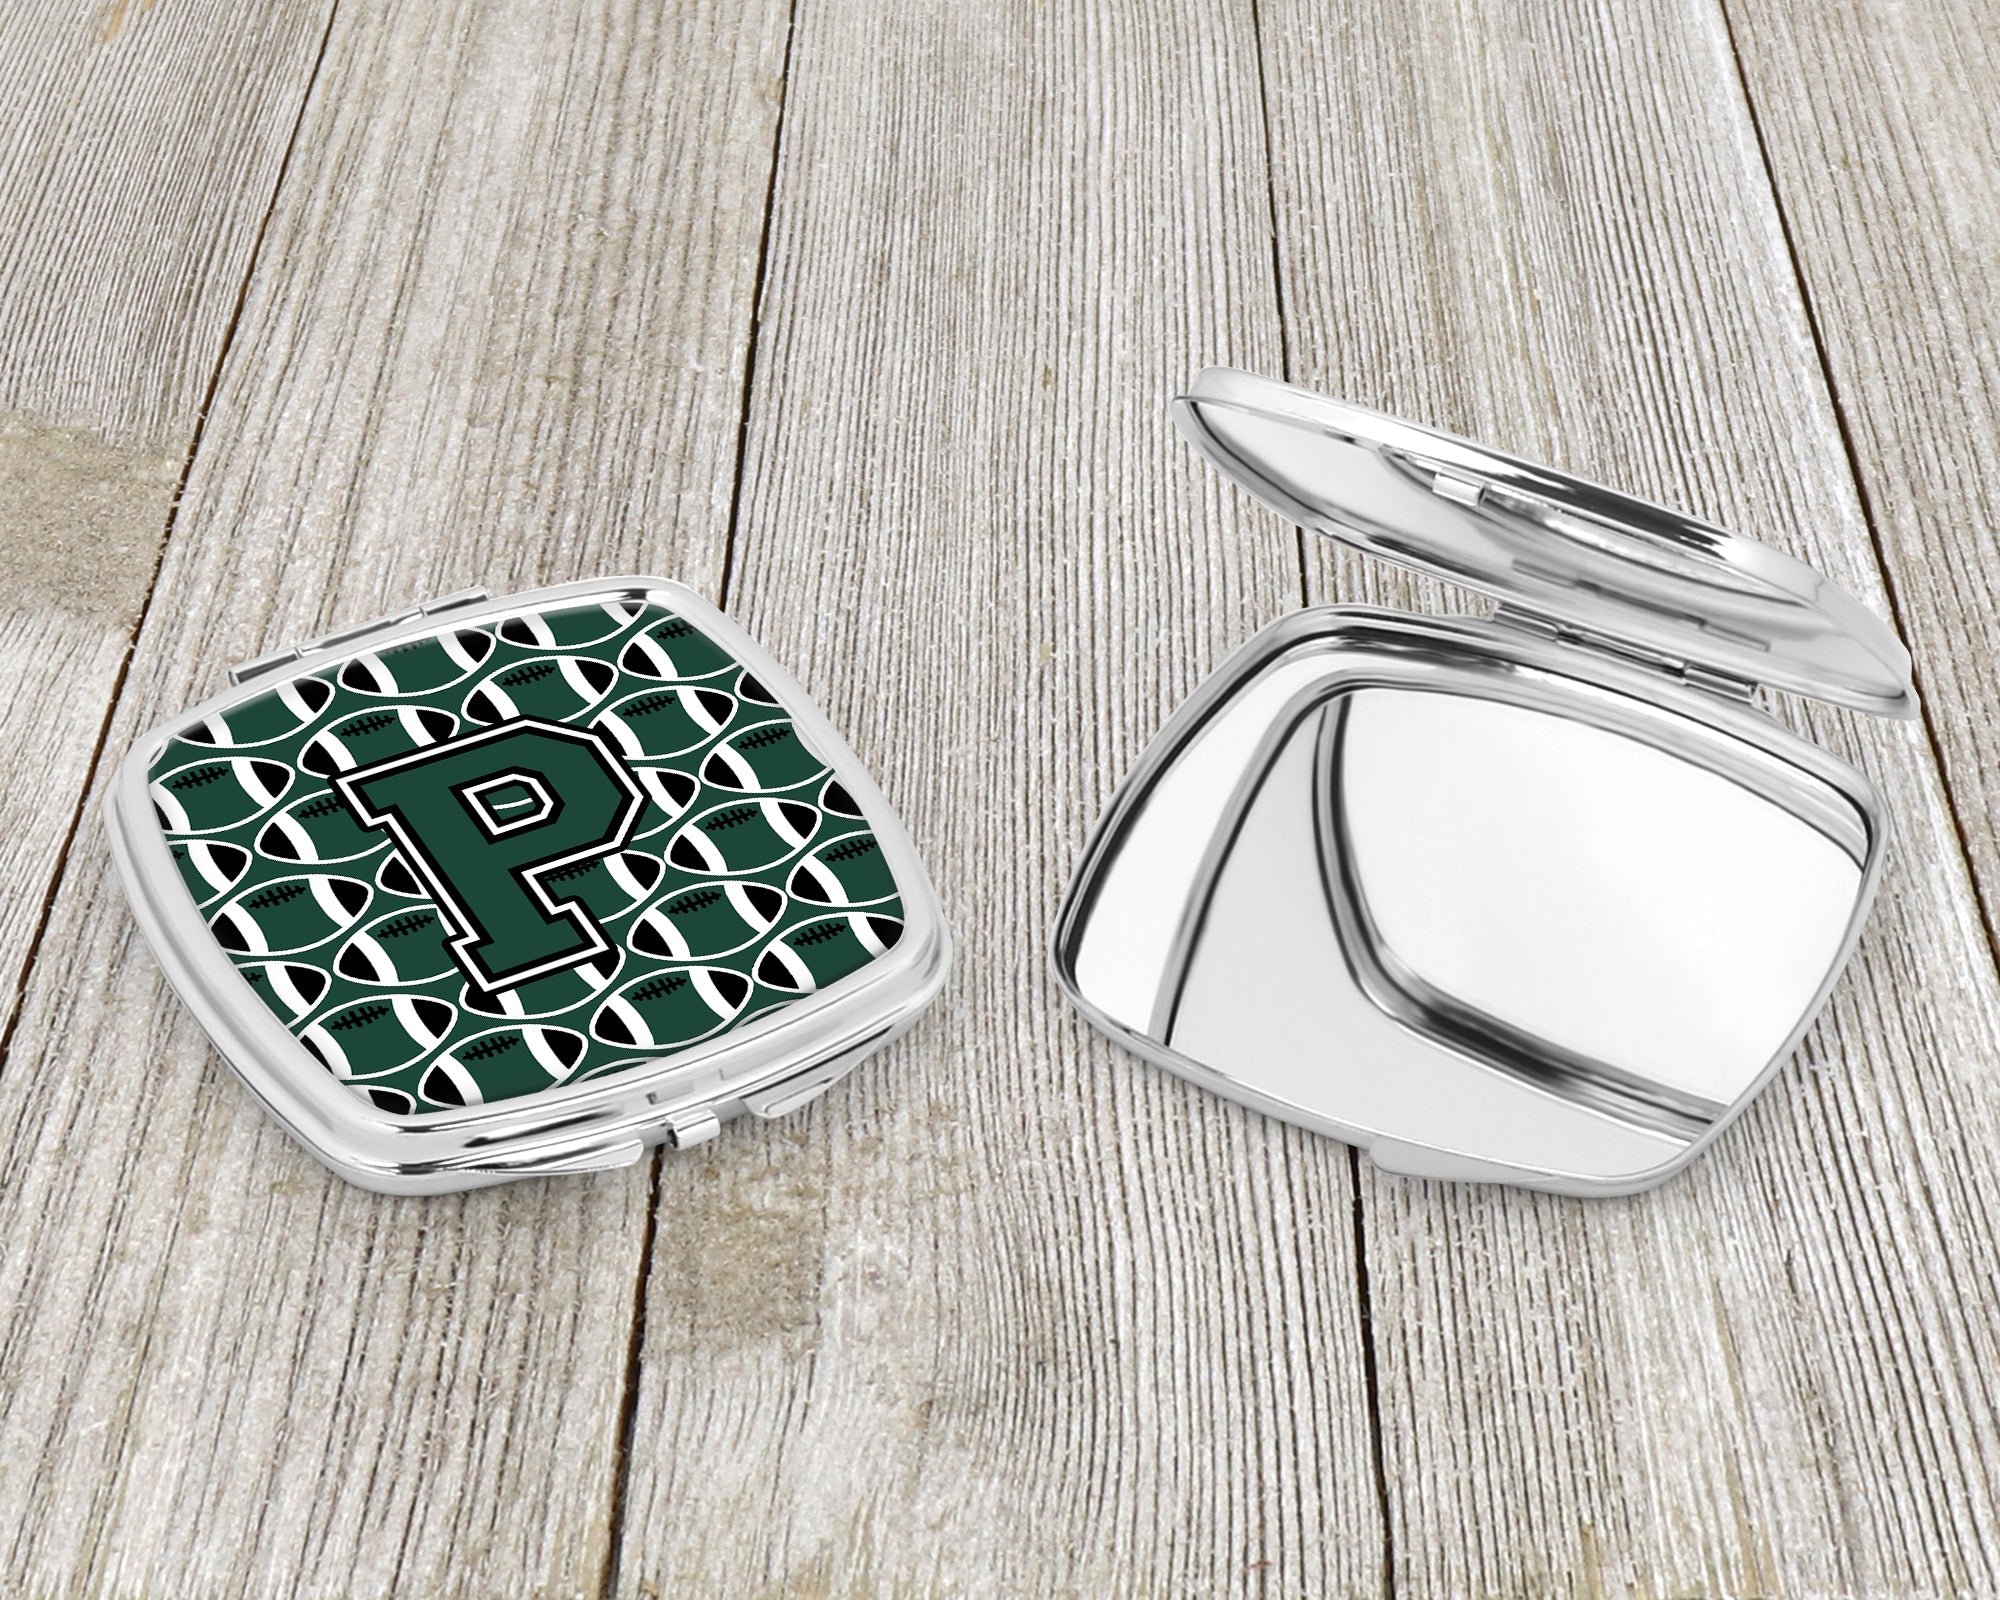 Letter P Football Green and White Compact Mirror CJ1071-PSCM  the-store.com.